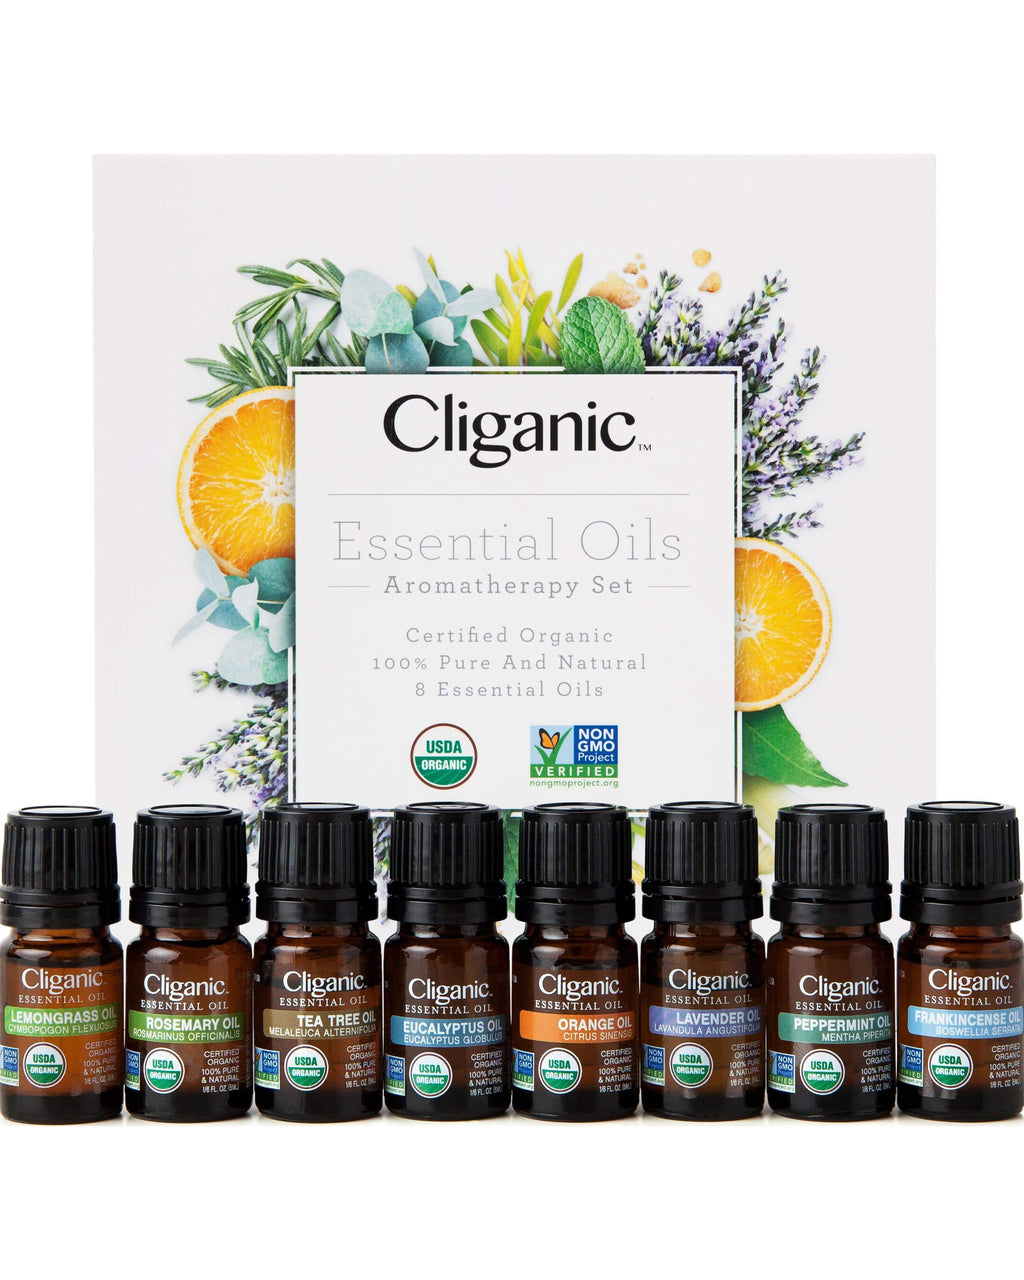 Cliganic - 🌿 Peppermint essential oil has a crisp, clean and refreshing  scent. It also has energizing and uplifting therapeutic properties. Its  aromatherapy benefits include heightened awareness and alertness, increased  stamina and